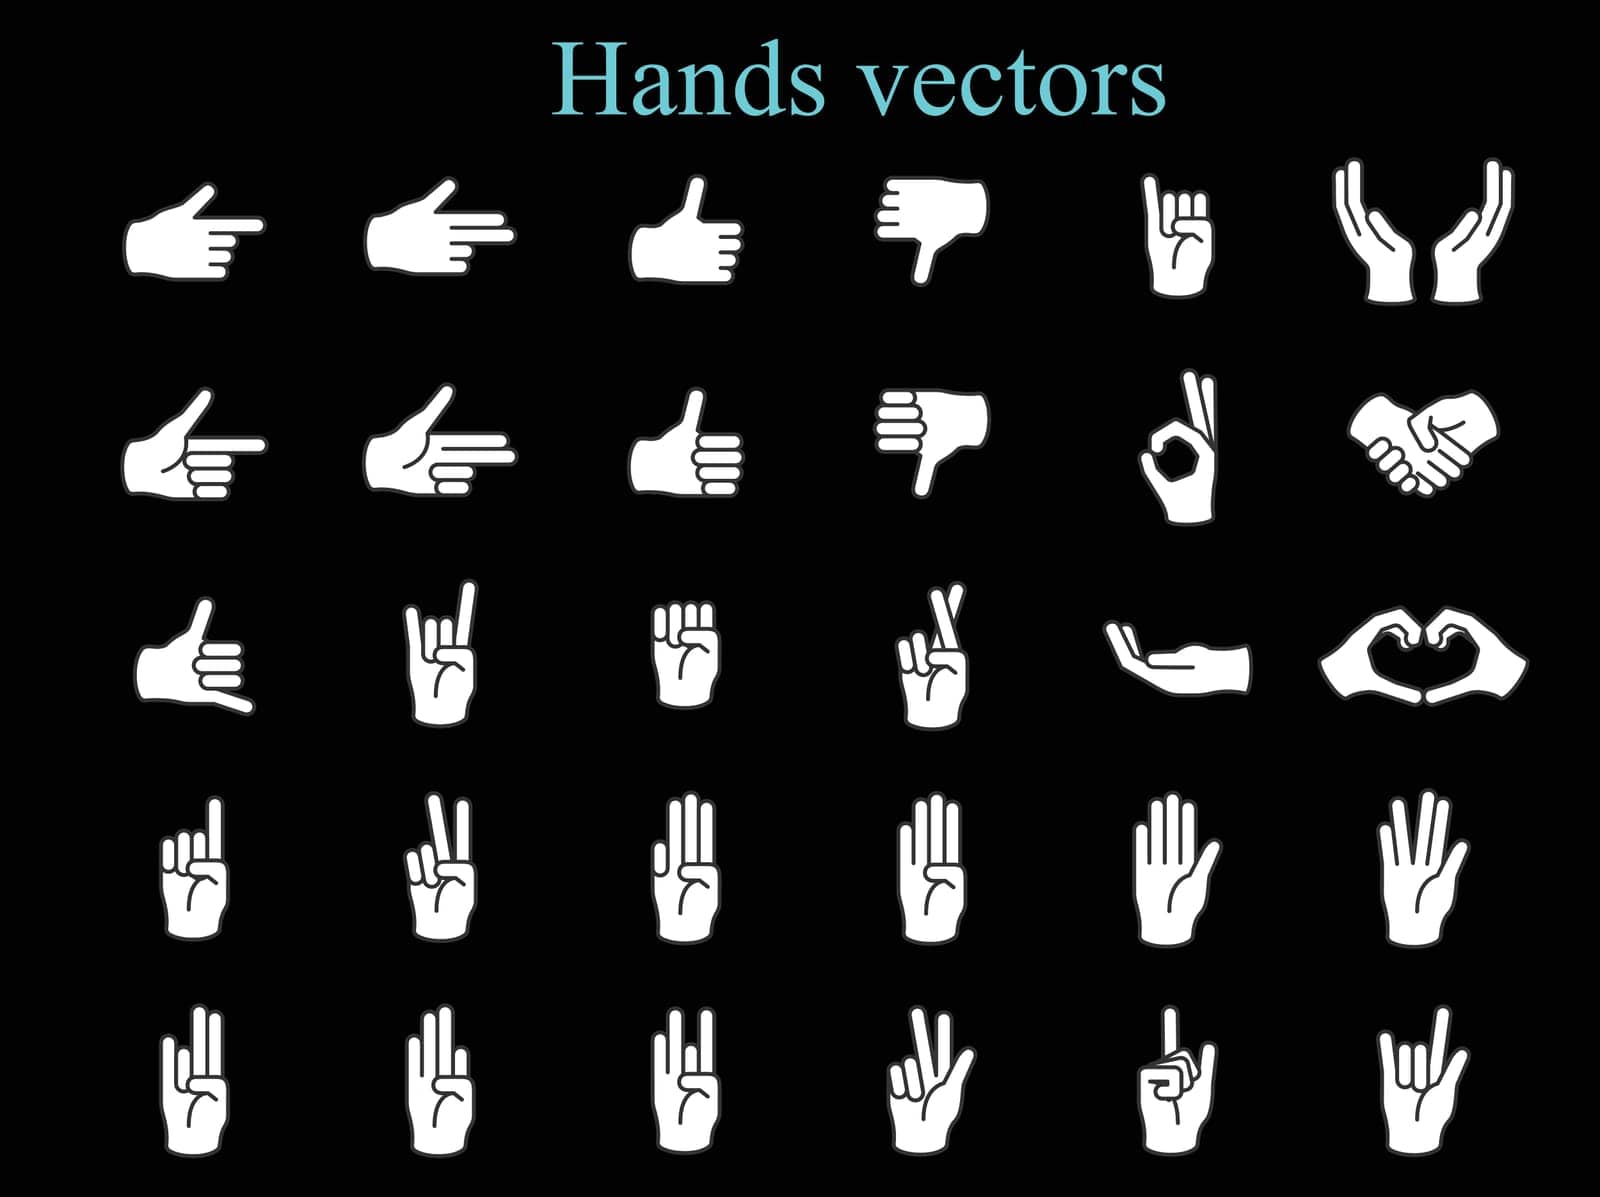 we are providing different types of hands vectors